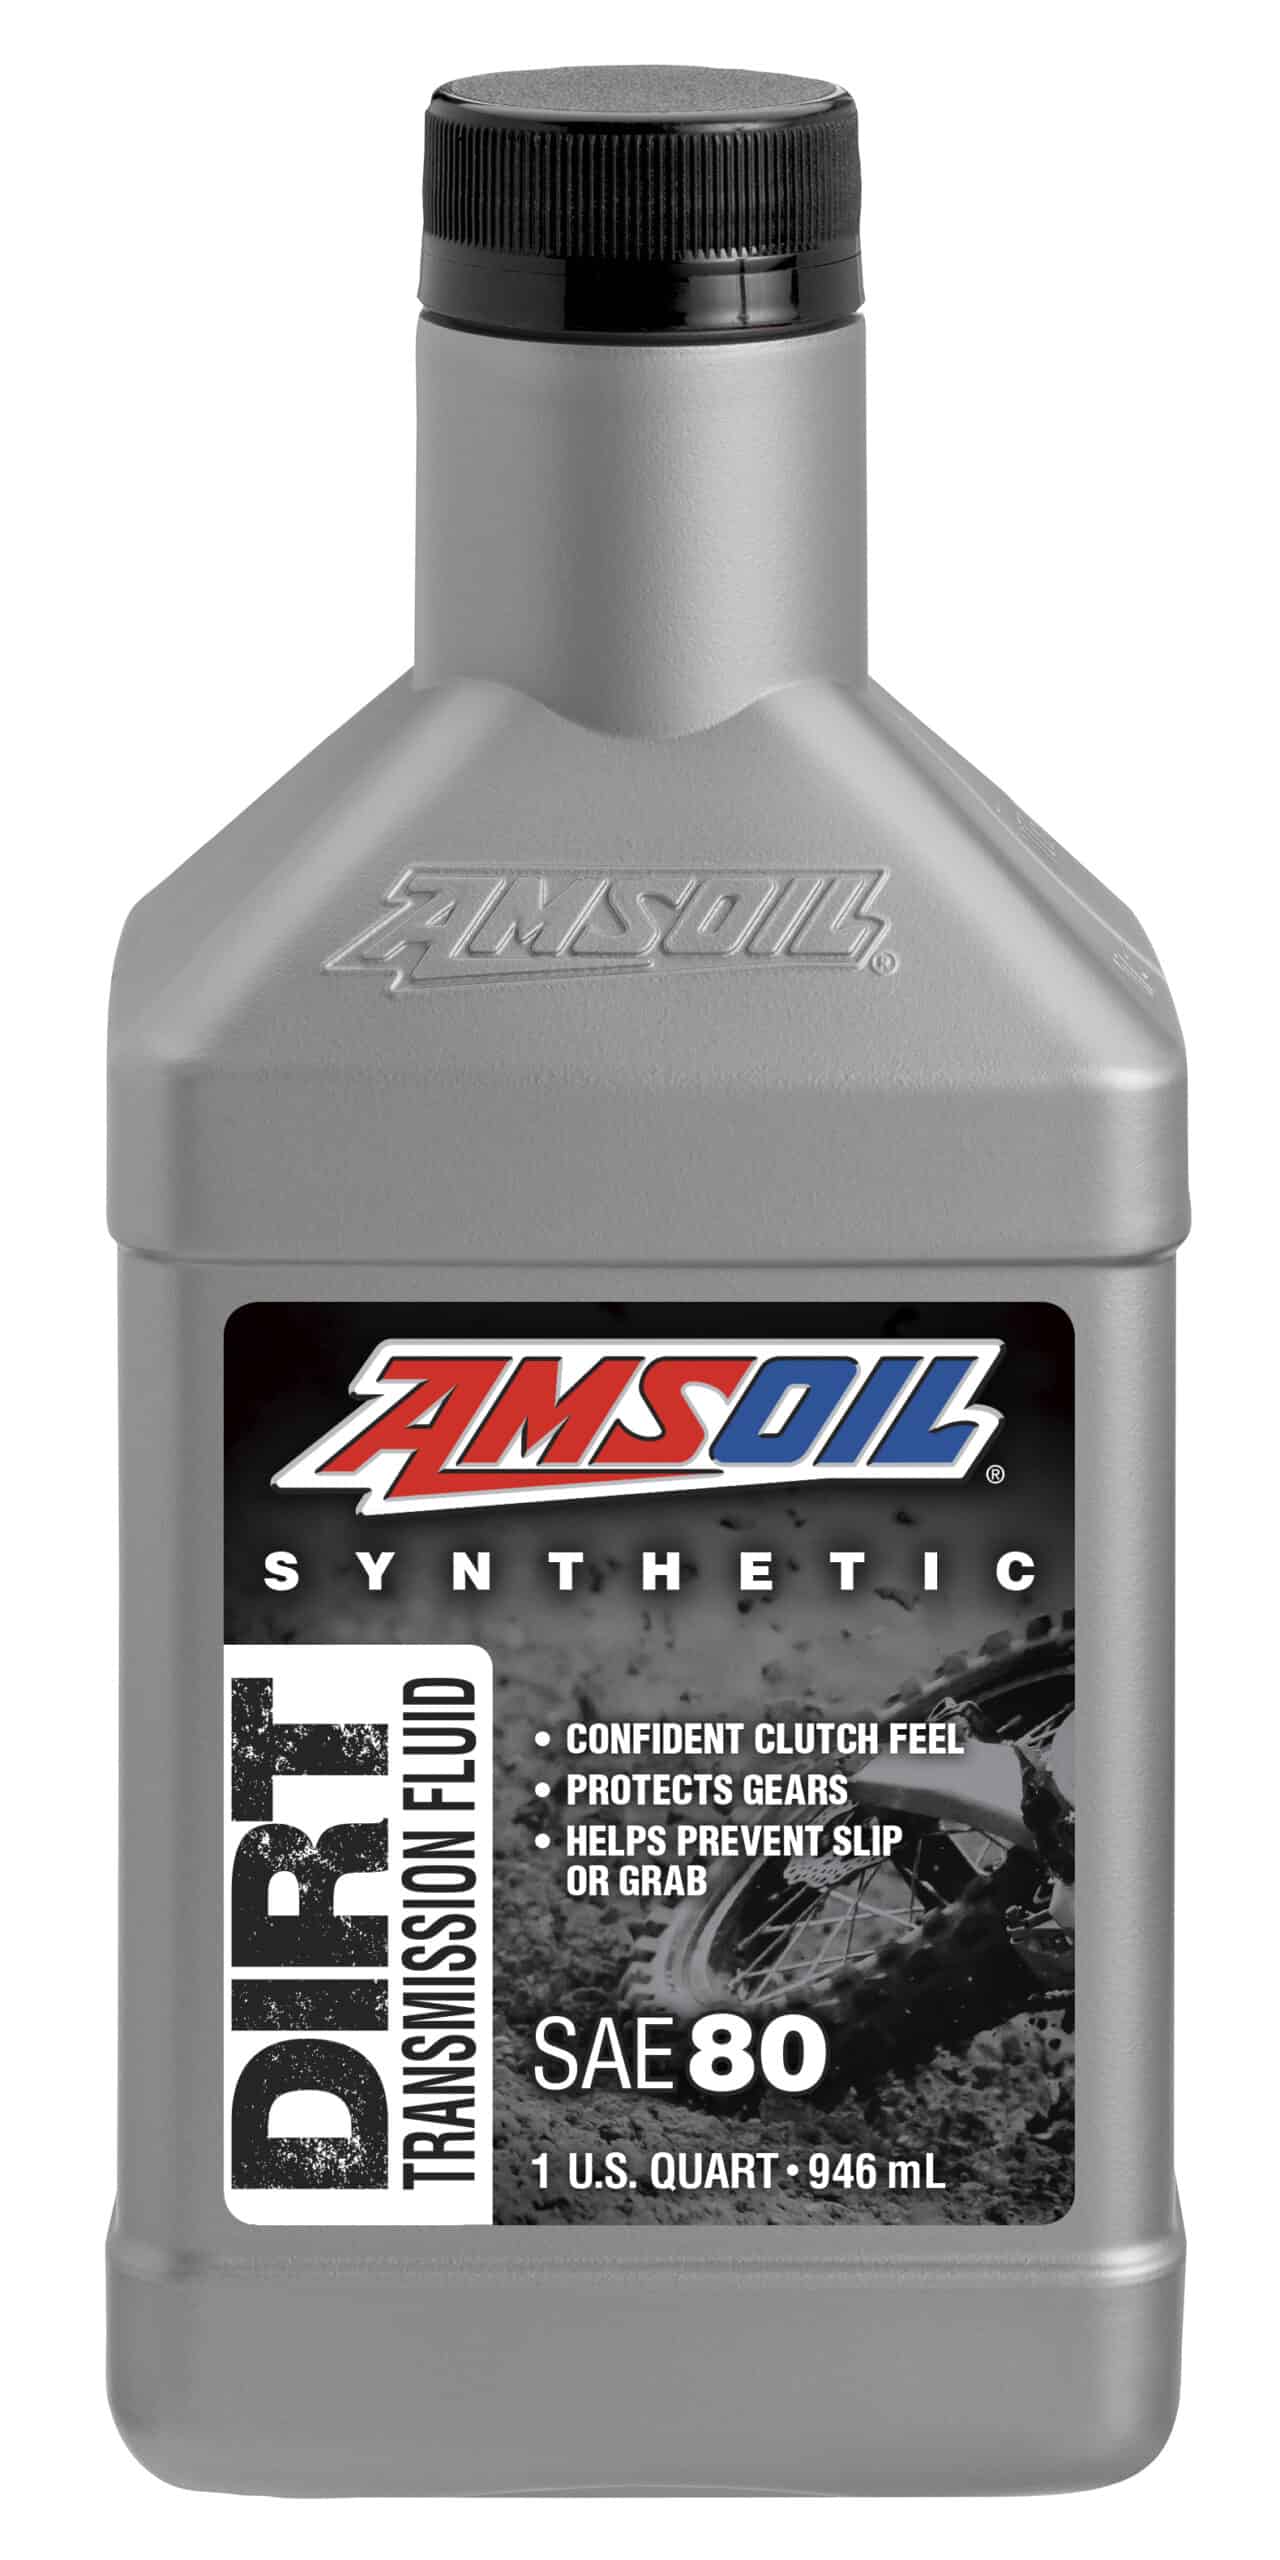 A bottle of AMSOIL Synthetic Dirt Bike Transmission Fluid, specifically formulated to provide consistent clutch feel, delivering riders confidence.